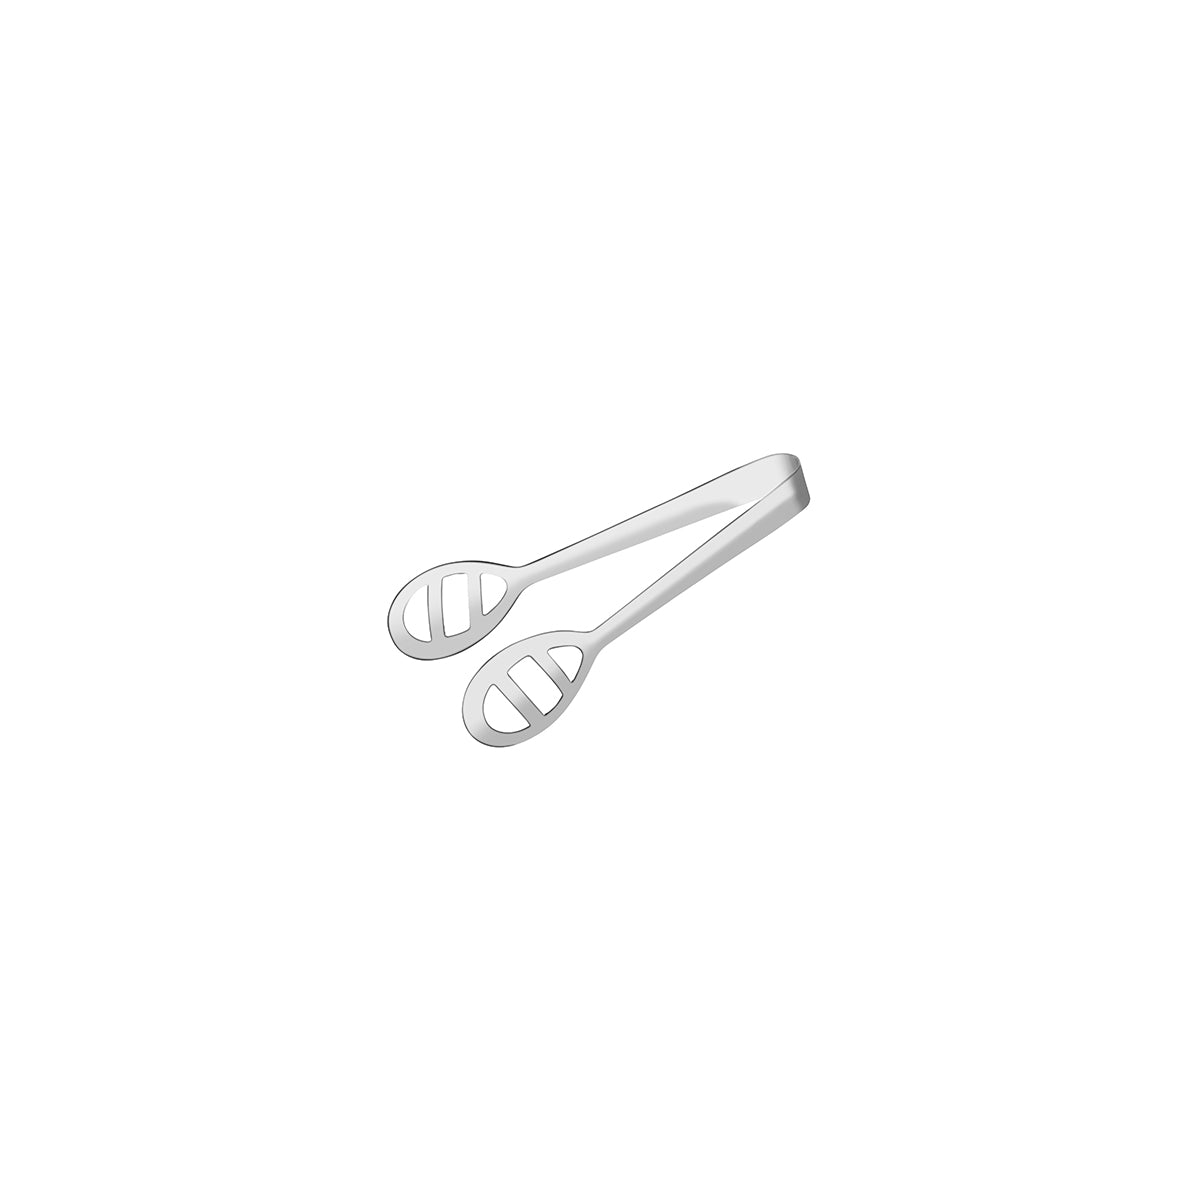 70210 Chef Inox Vegetable Tong Stainless Steel 195mm Tomkin Australia Hospitality Supplies